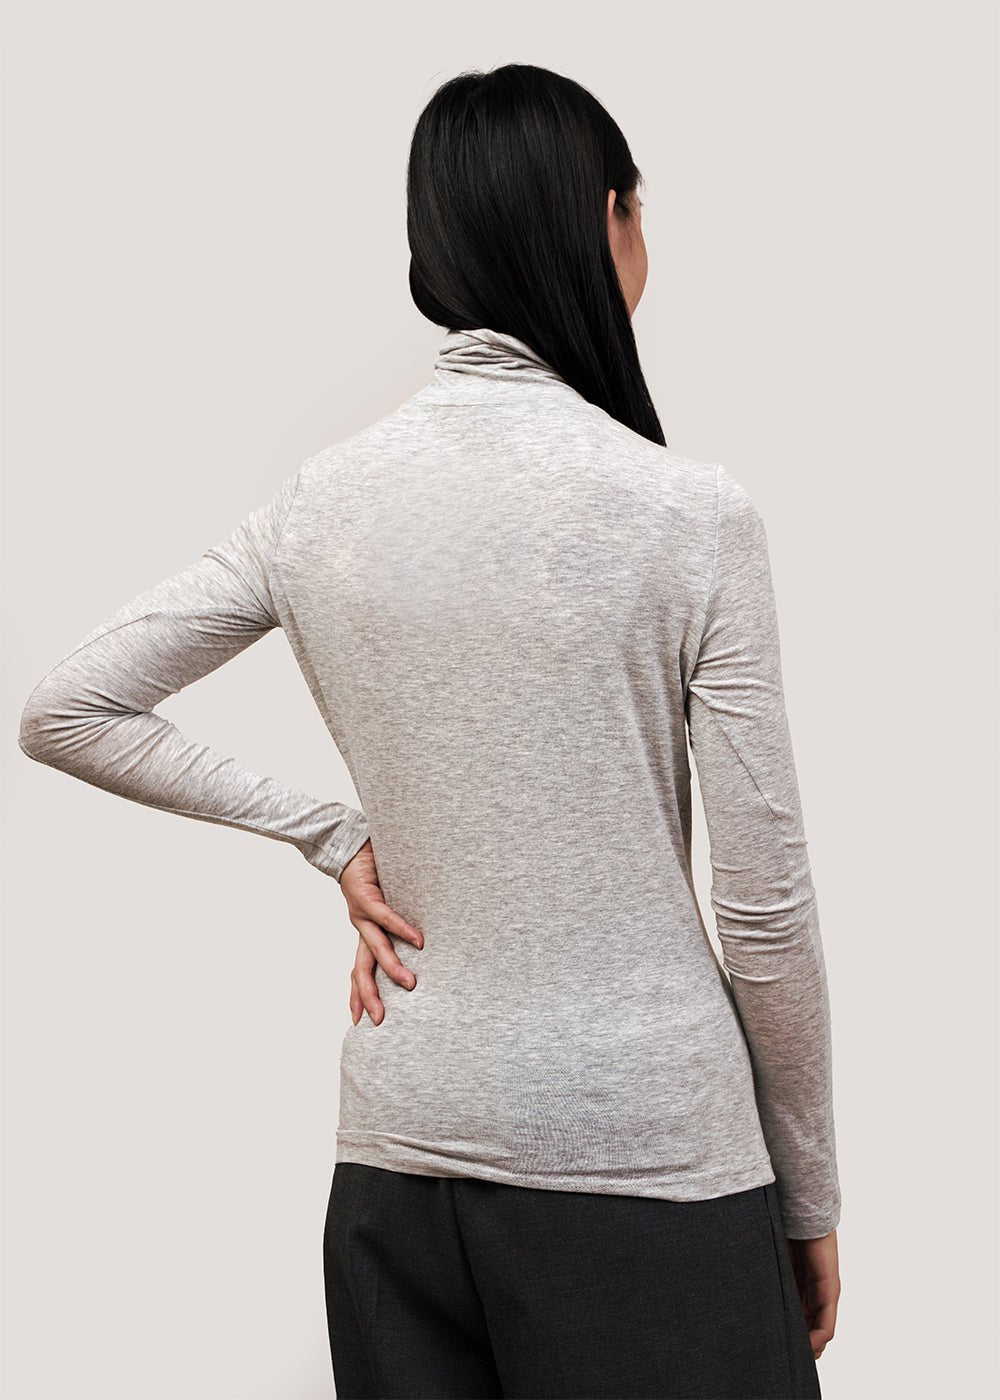 Mijeong Park Heather Grey Roll Neck Jersey Top - New Classics Studios Sustainable Ethical Fashion Canada